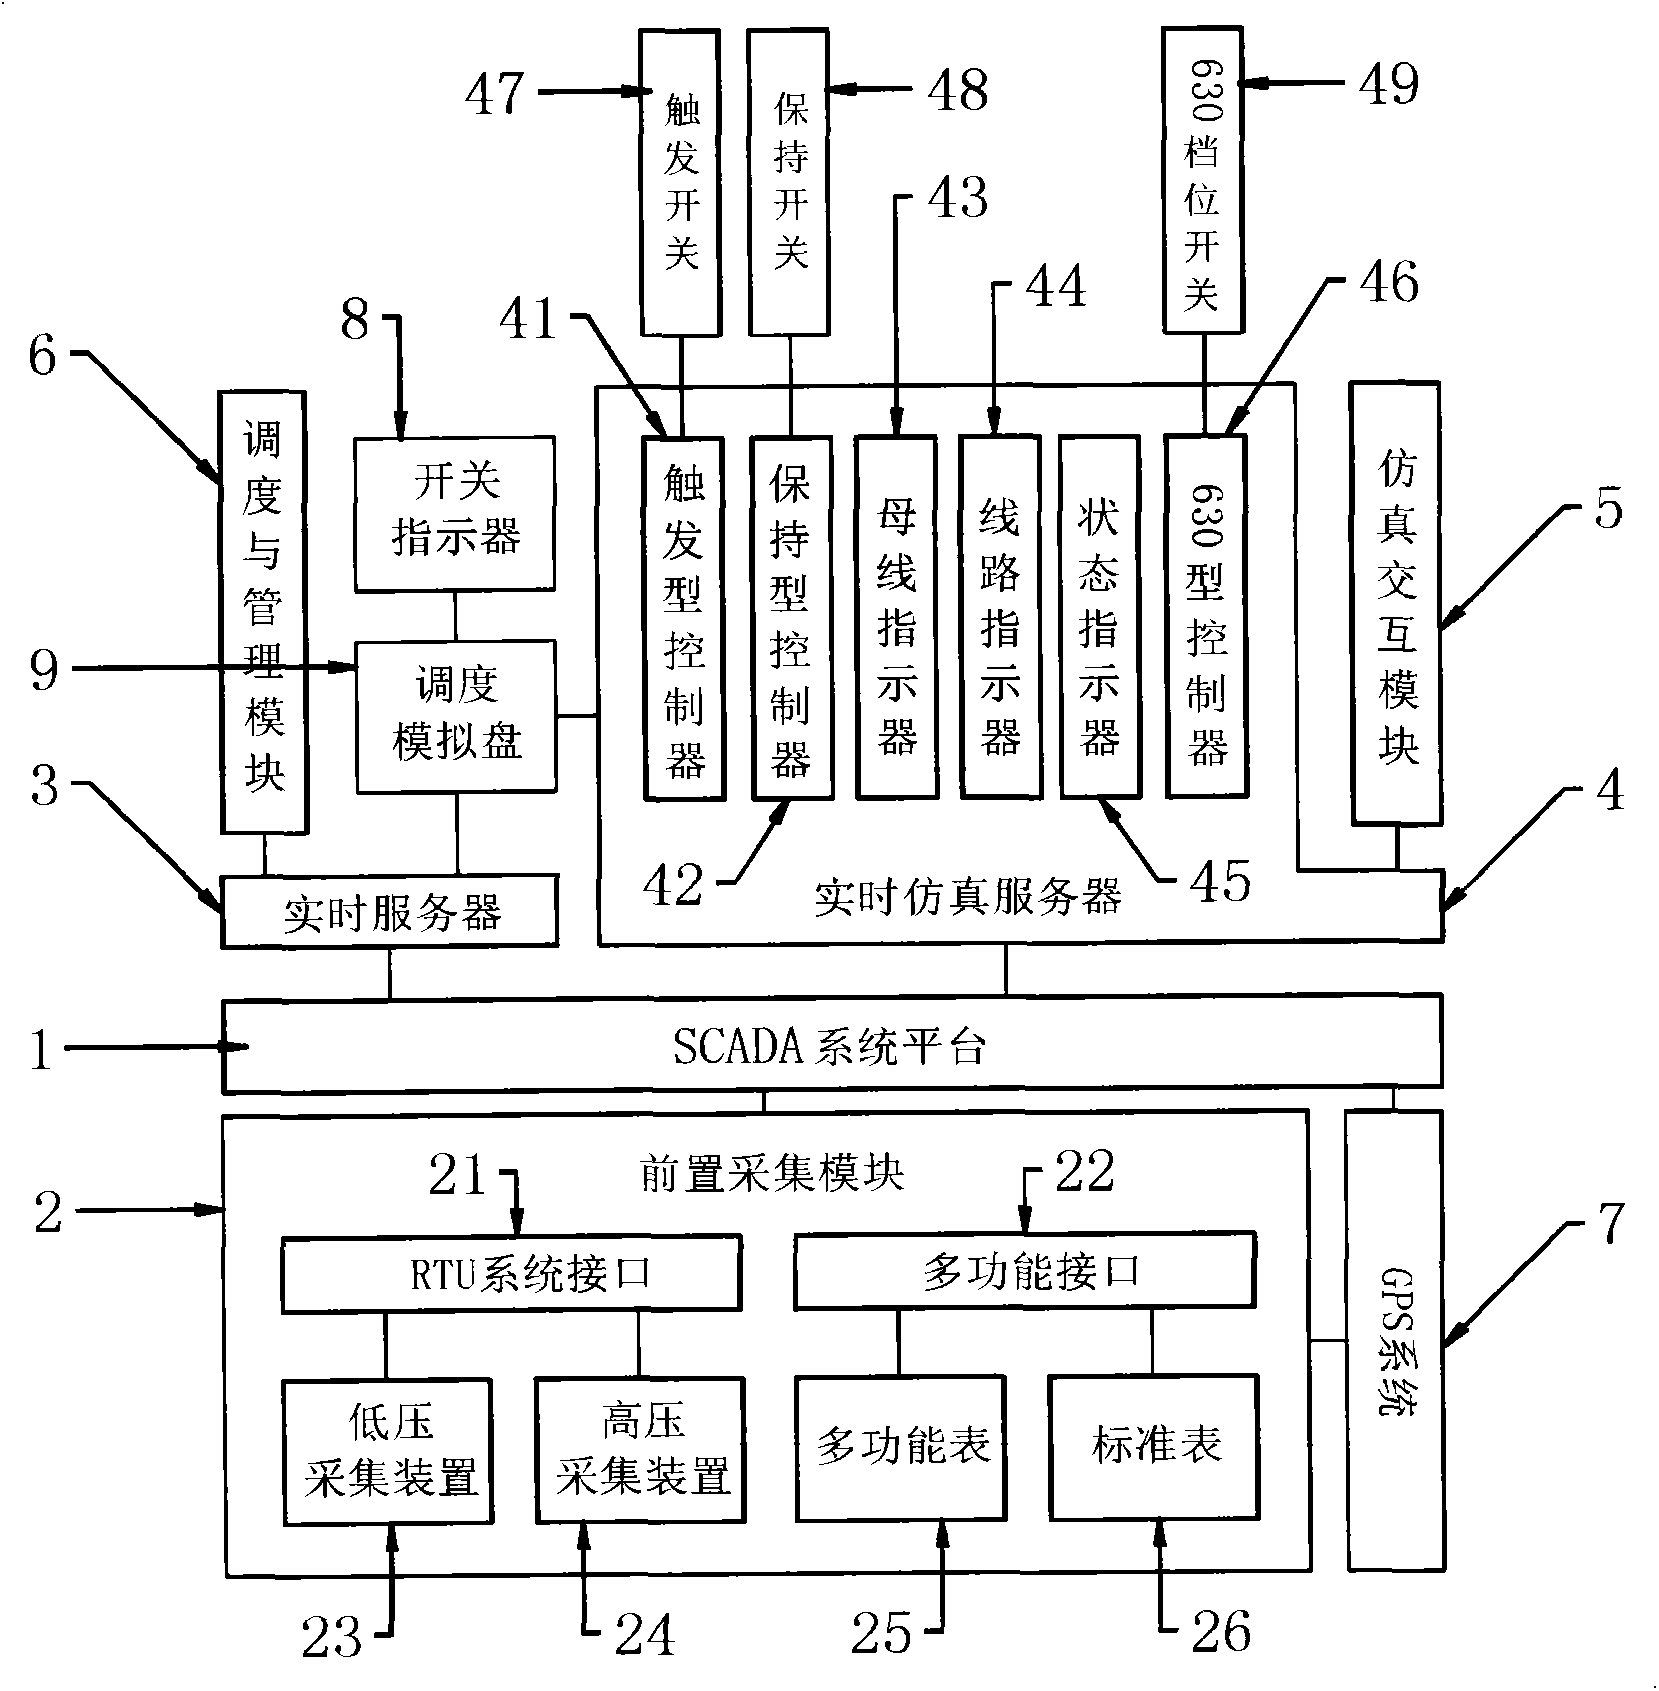 Simulating system for simulated training of electricity-consuming network operation